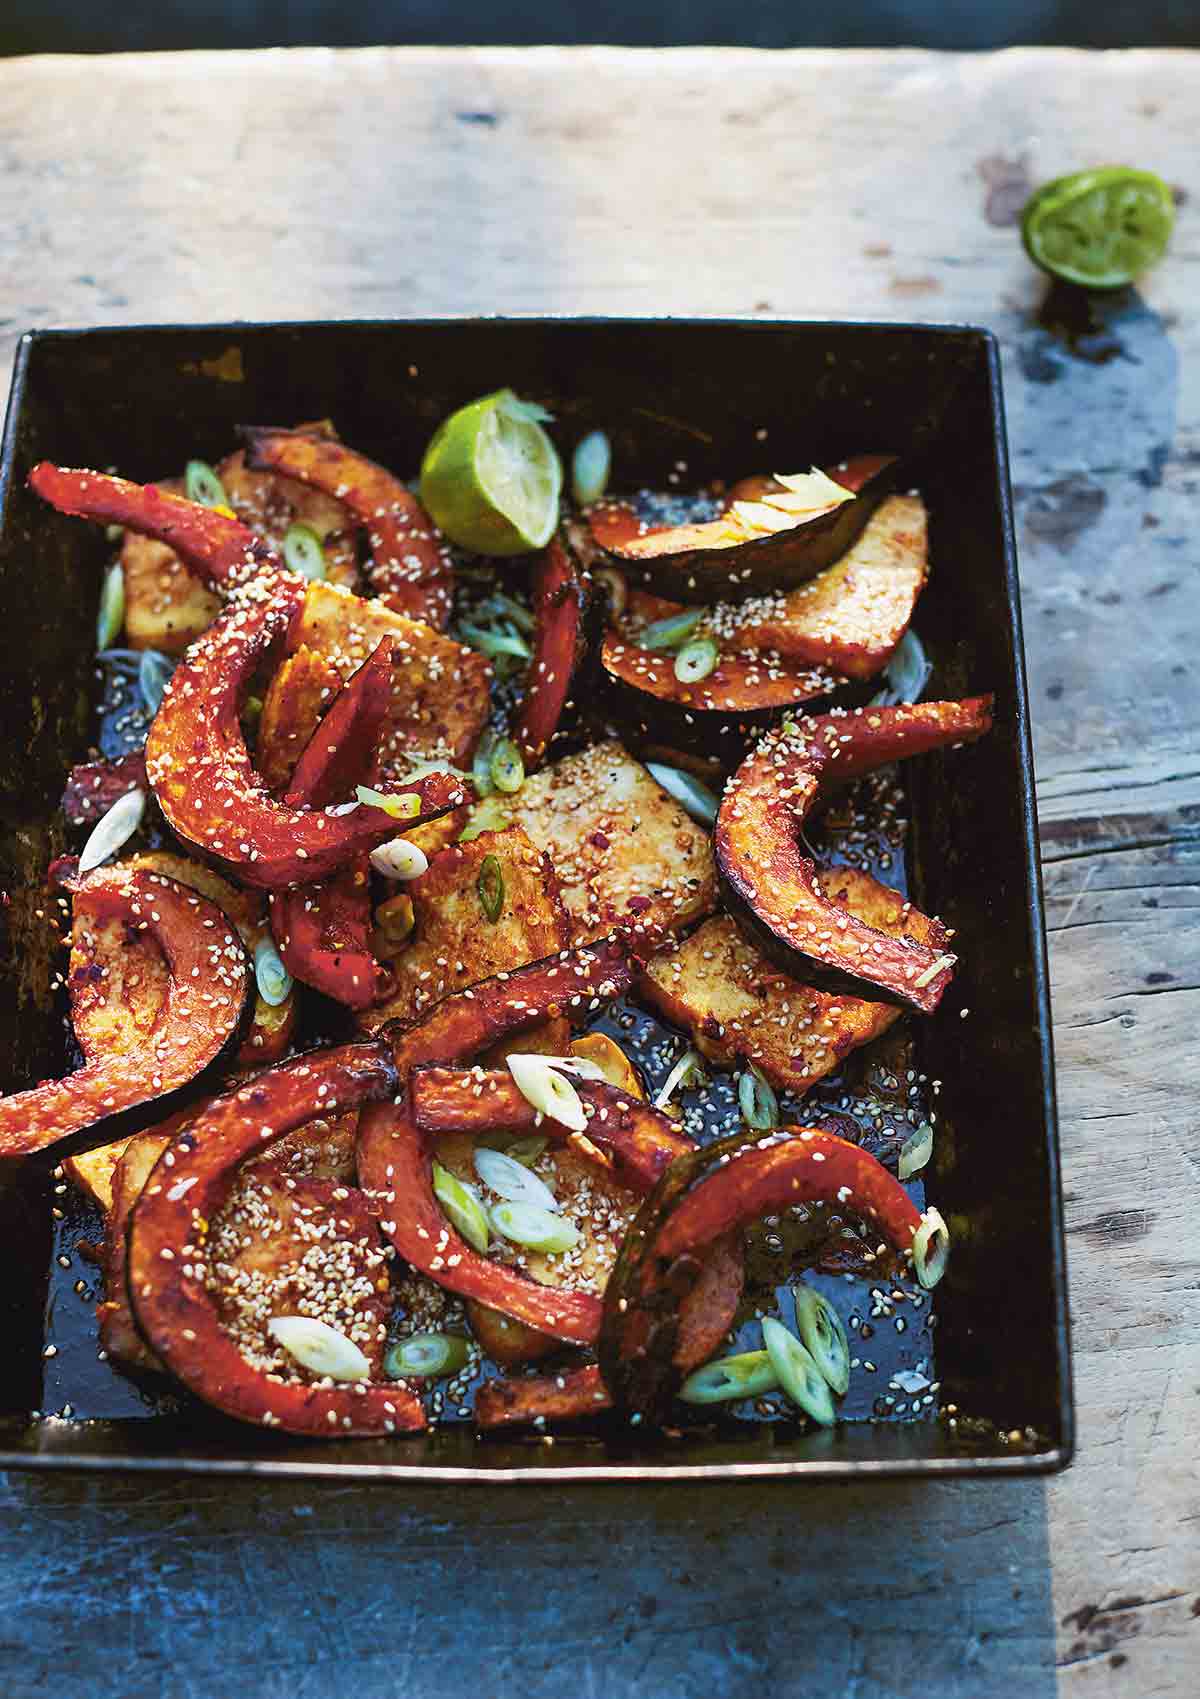 Wedges of roasted squash in a black square serving dish, scattered with sesame seeds and lime halves on the side.